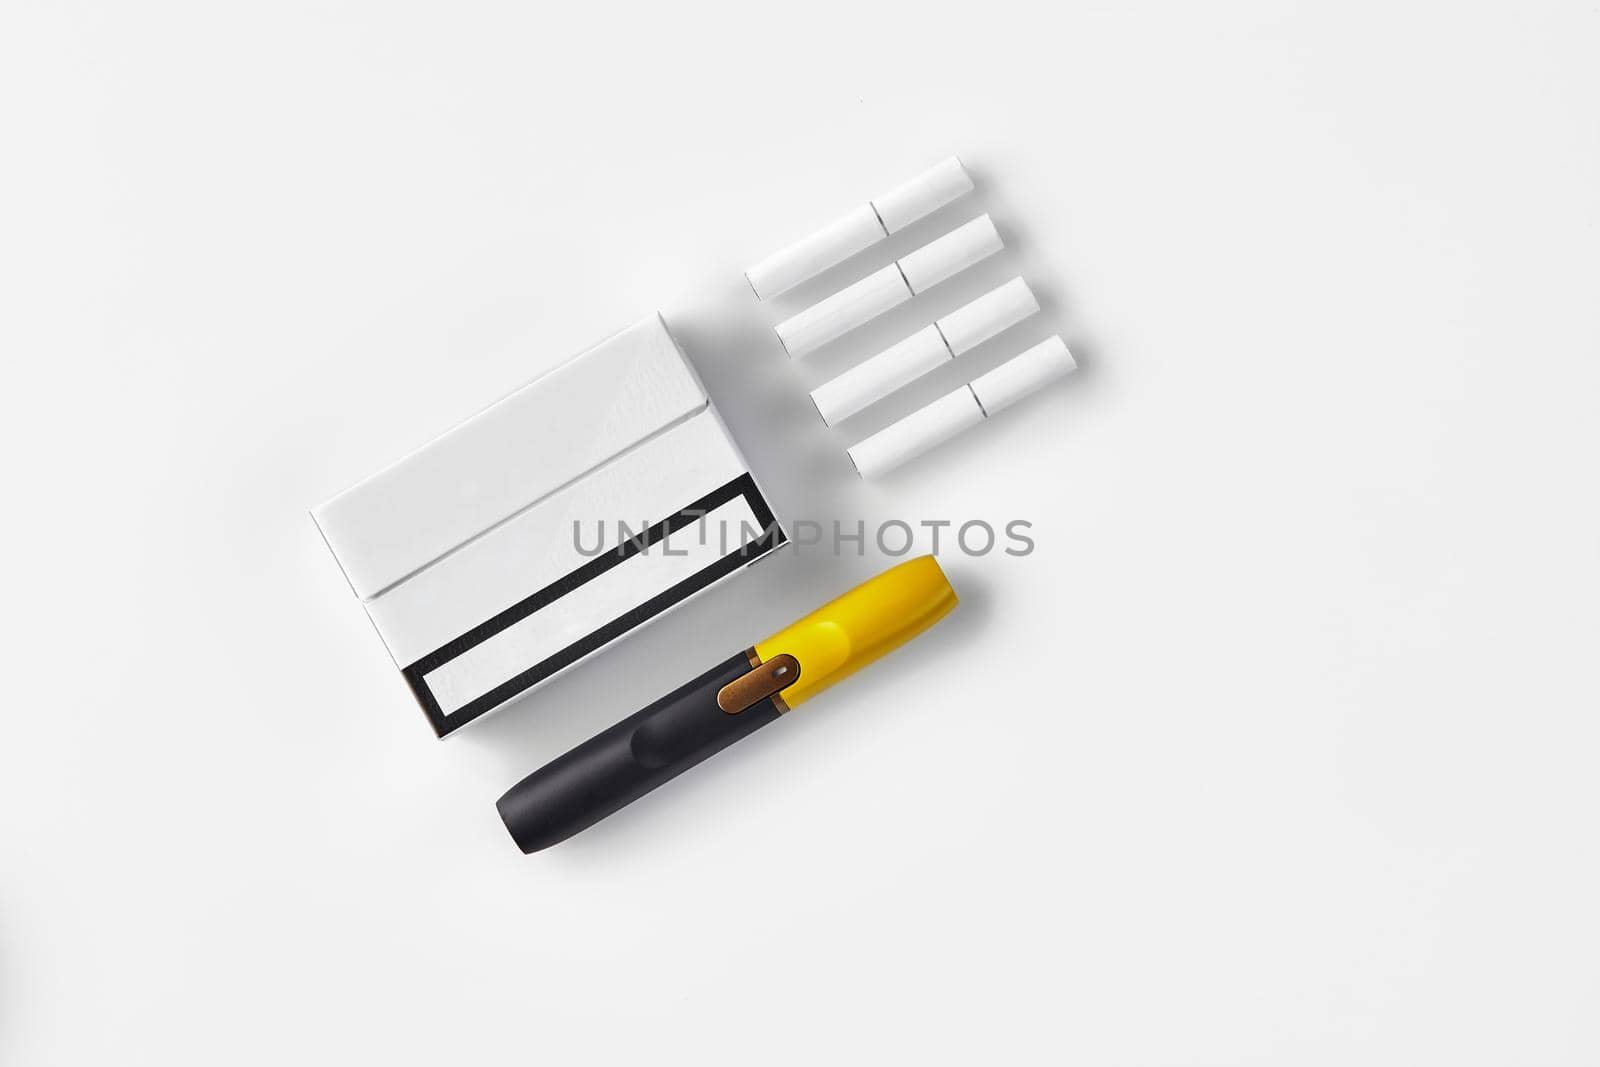 New generation black and yellow electronic cigarette, one pack and four heatsticks, isolated on white. Heating tobacco system. Close up by nazarovsergey